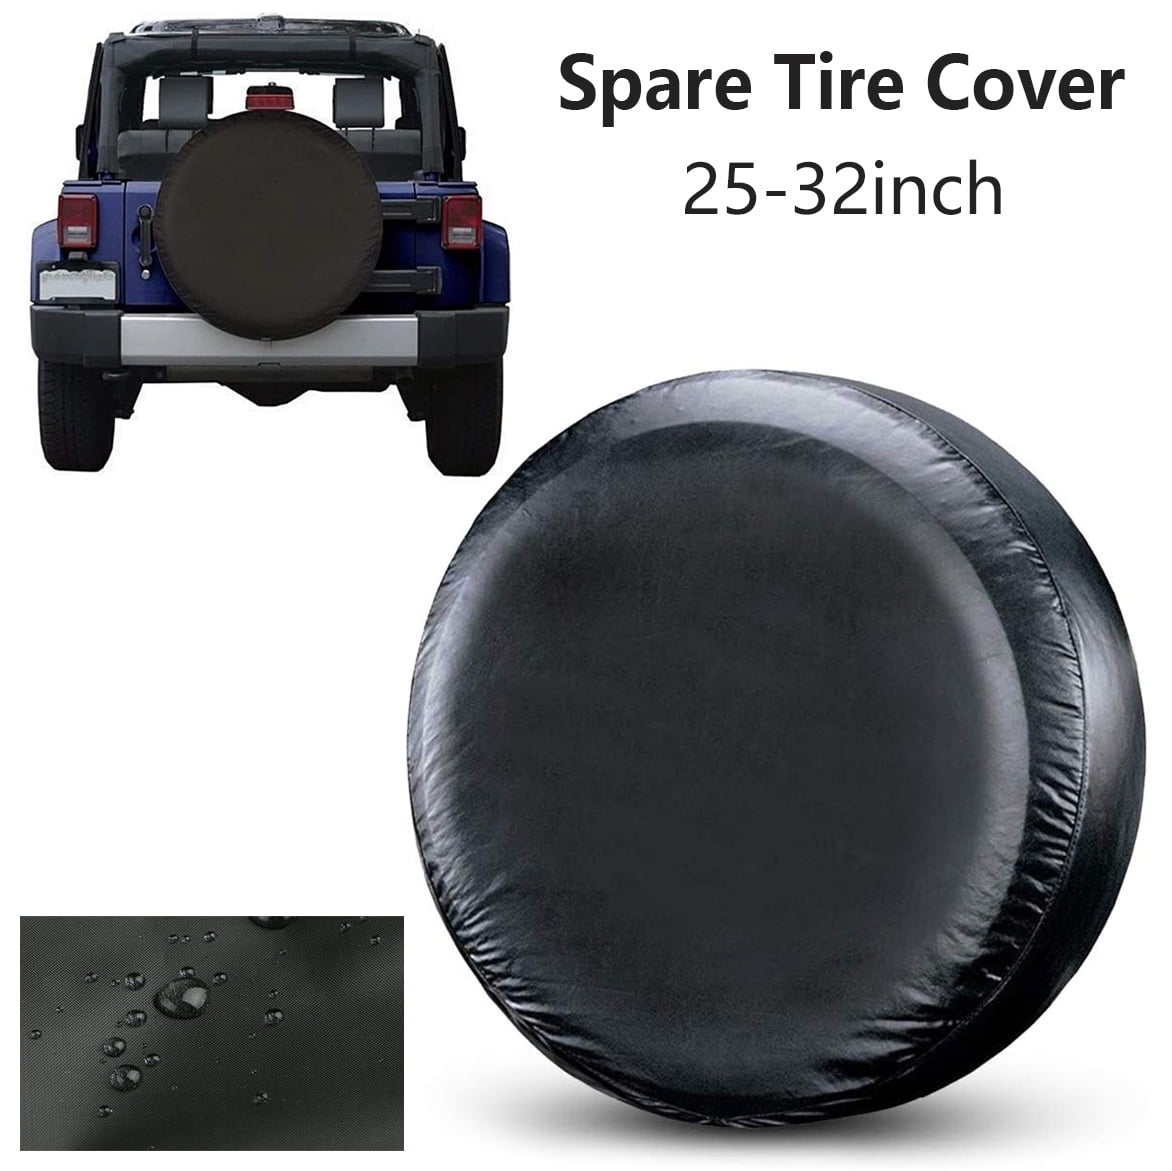 all sizes available Horse Eye Spare Tire Cover Jeep RV Camper Trailer & more 